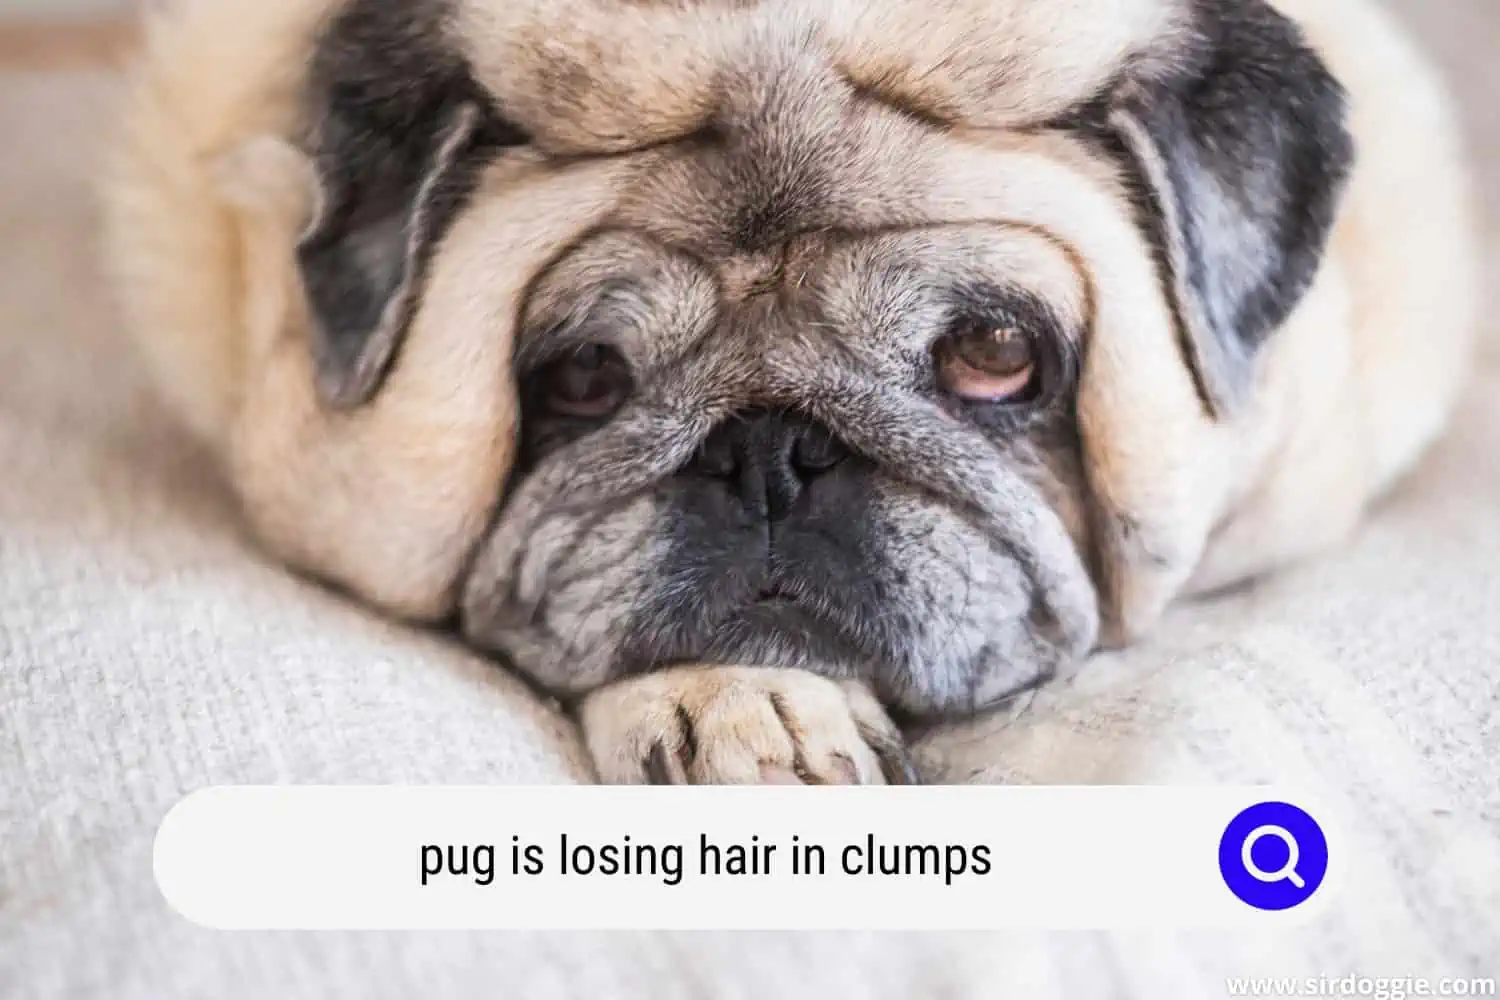 pug is losing hair in clumps